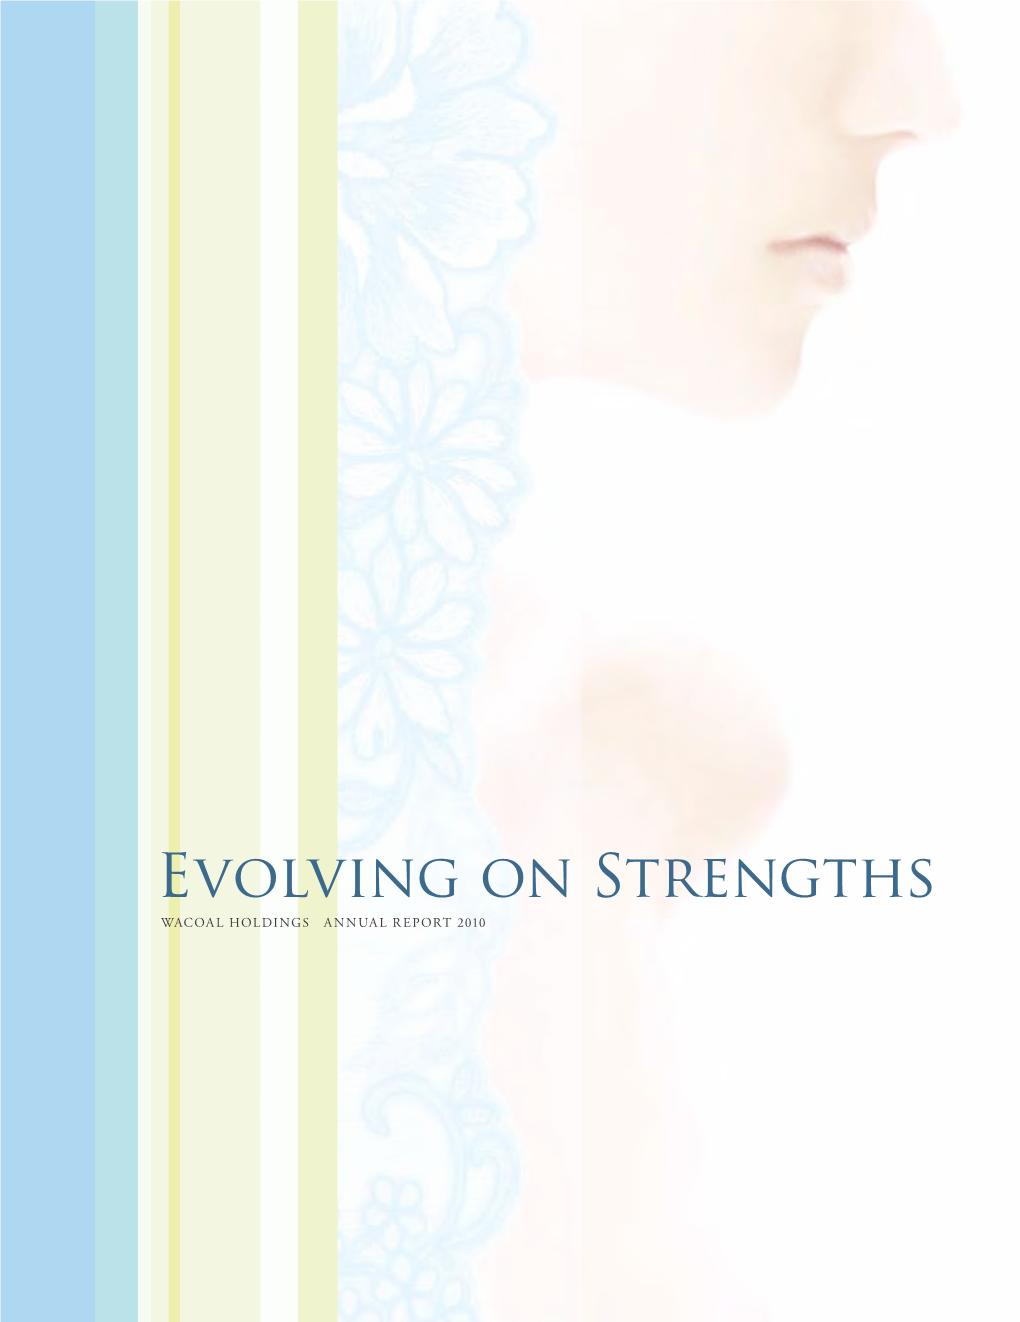 Evolving on Strengths WACOAL HOLDINGS ANNUAL REPORT 2010 Expressing Beauty